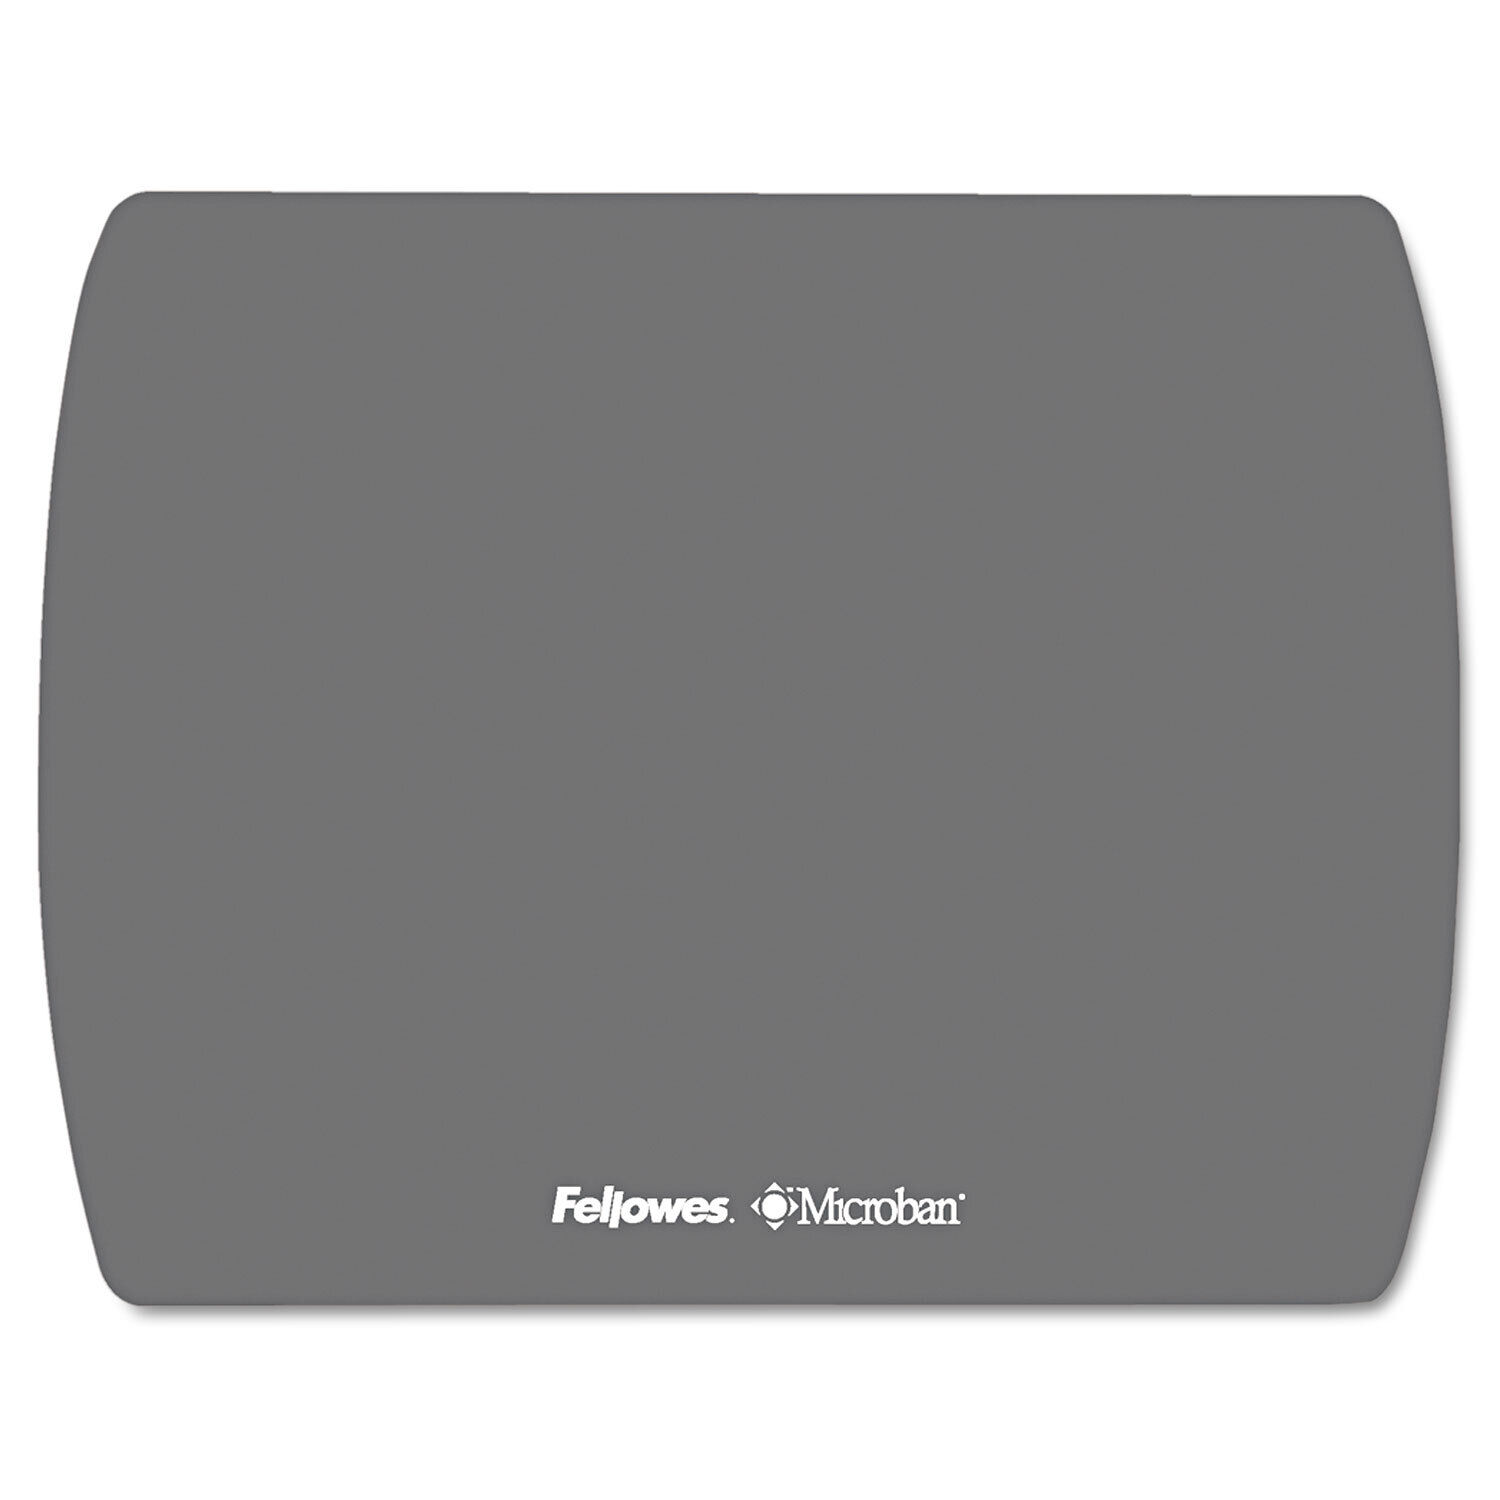 Fellowes Microban Ultra Thin Mouse Pad Graphite 5908201